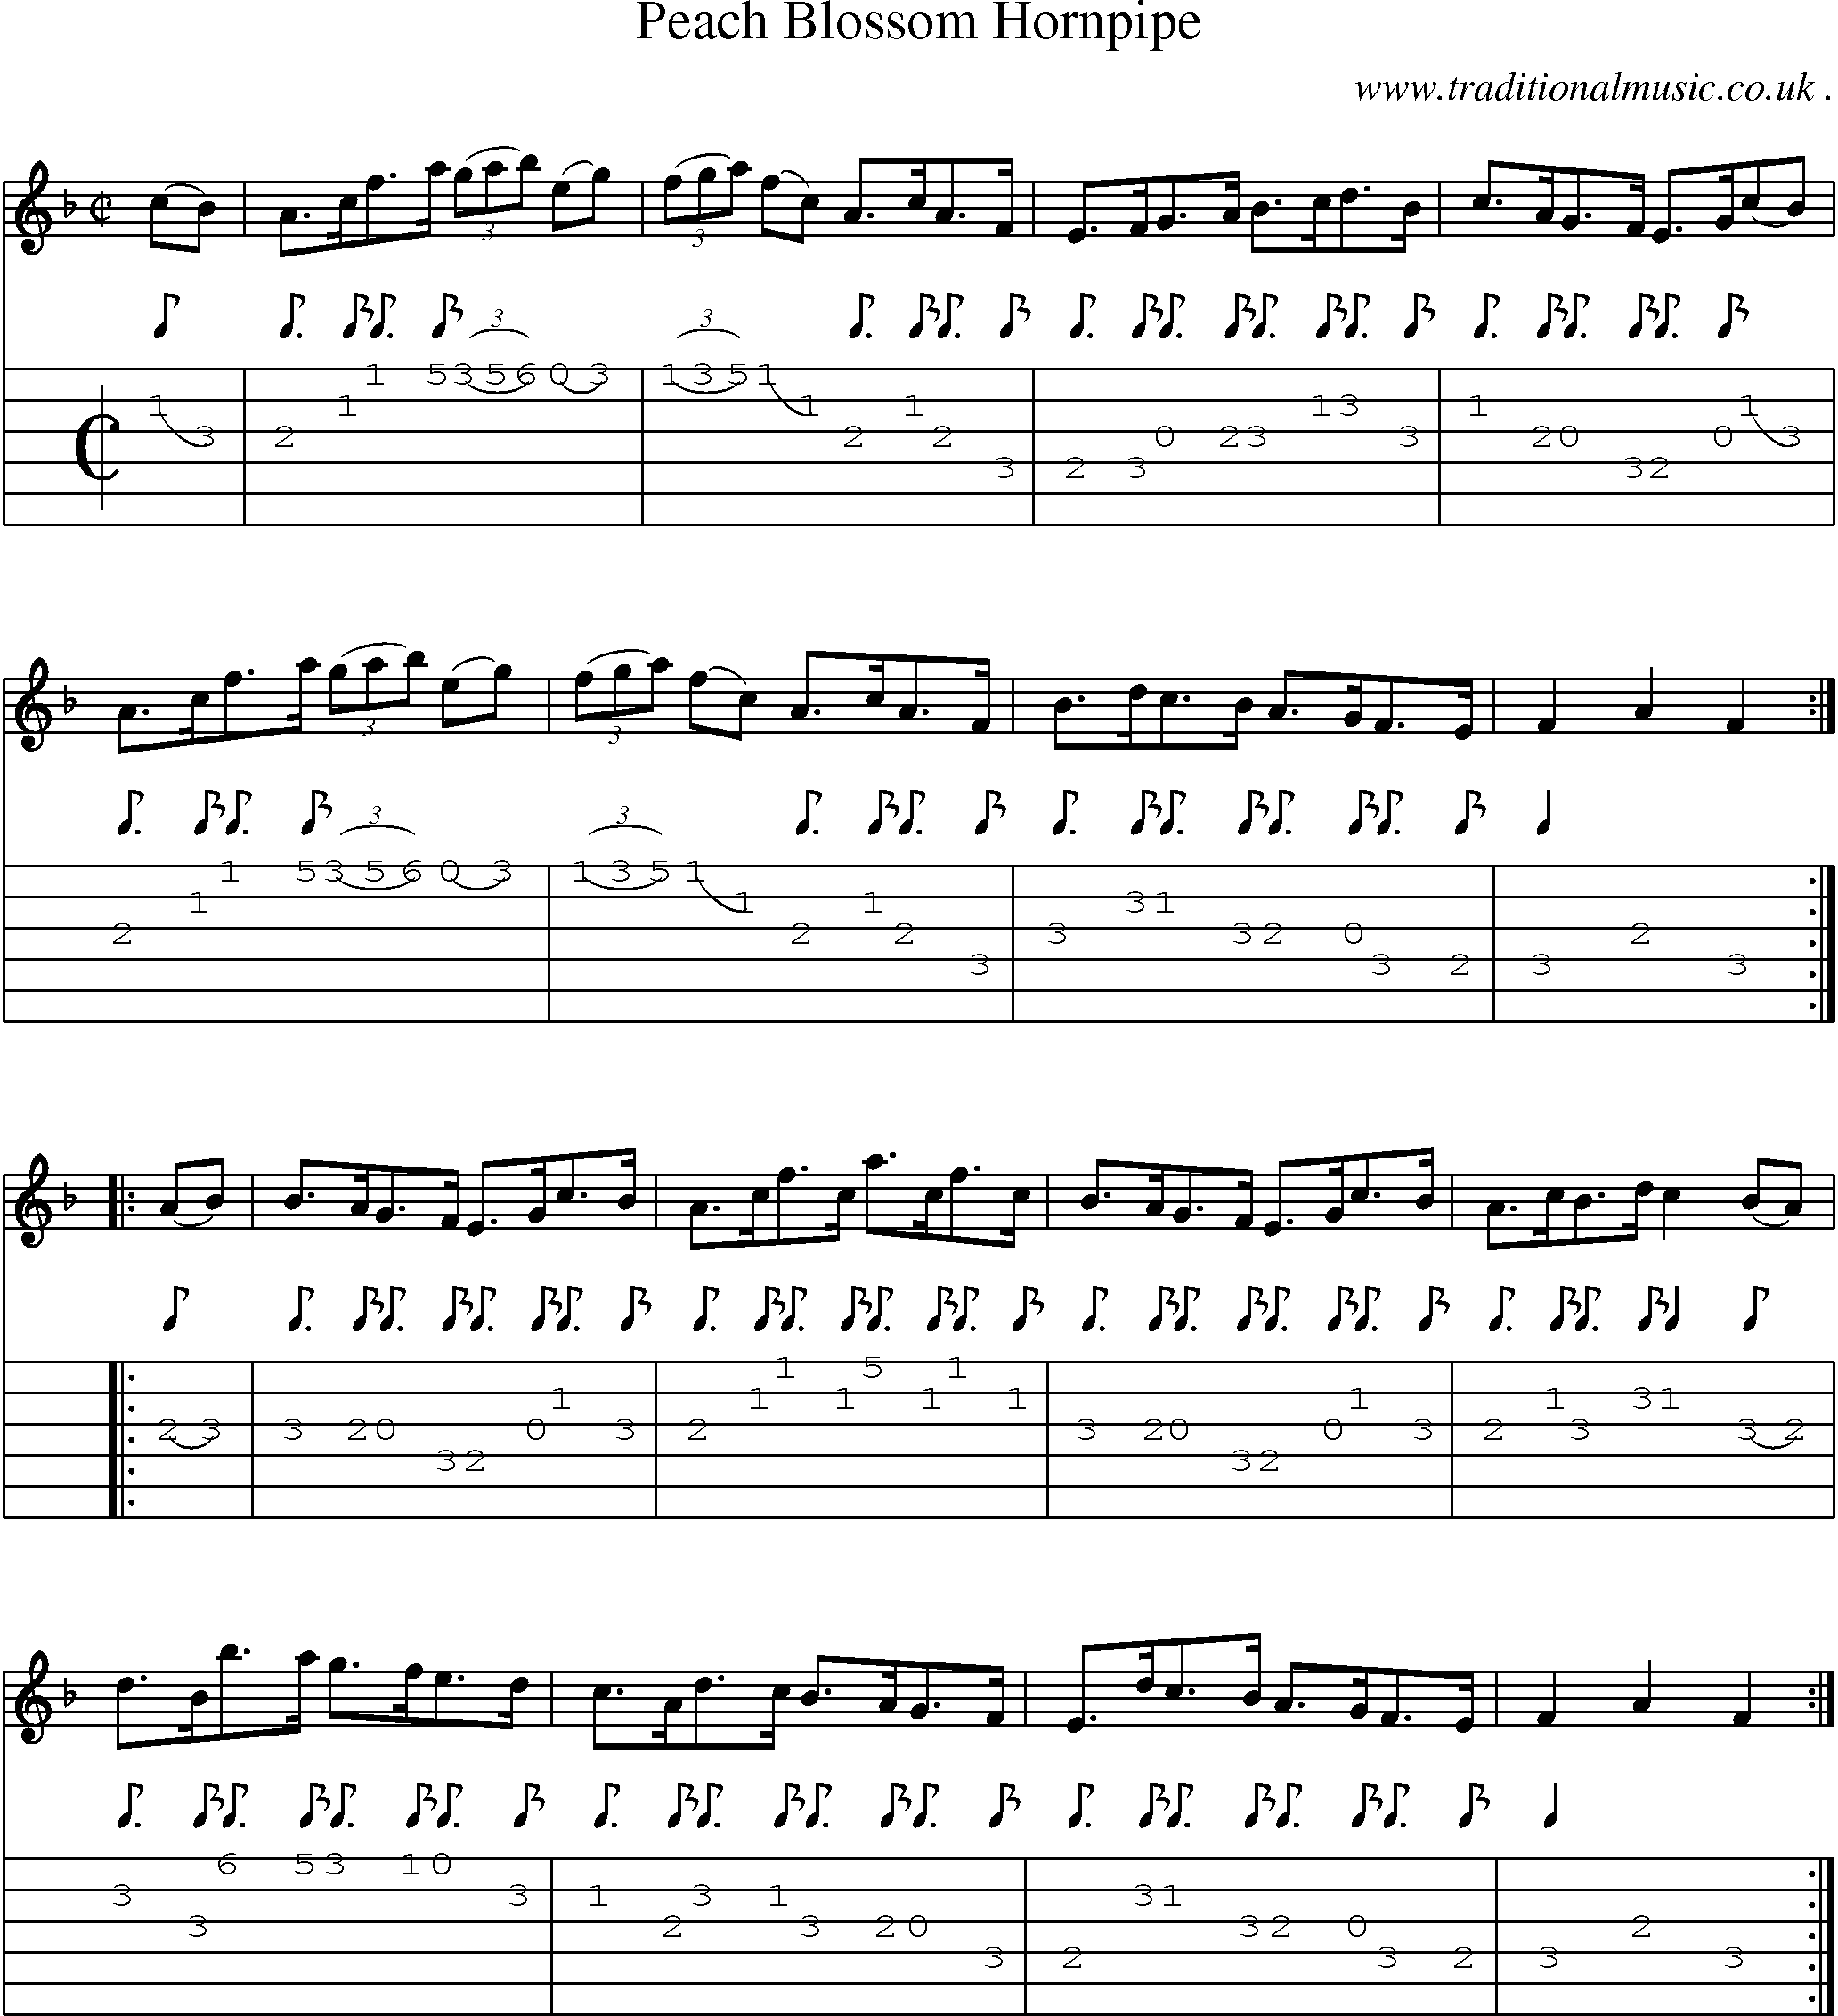 Sheet-Music and Guitar Tabs for Peach Blossom Hornpipe